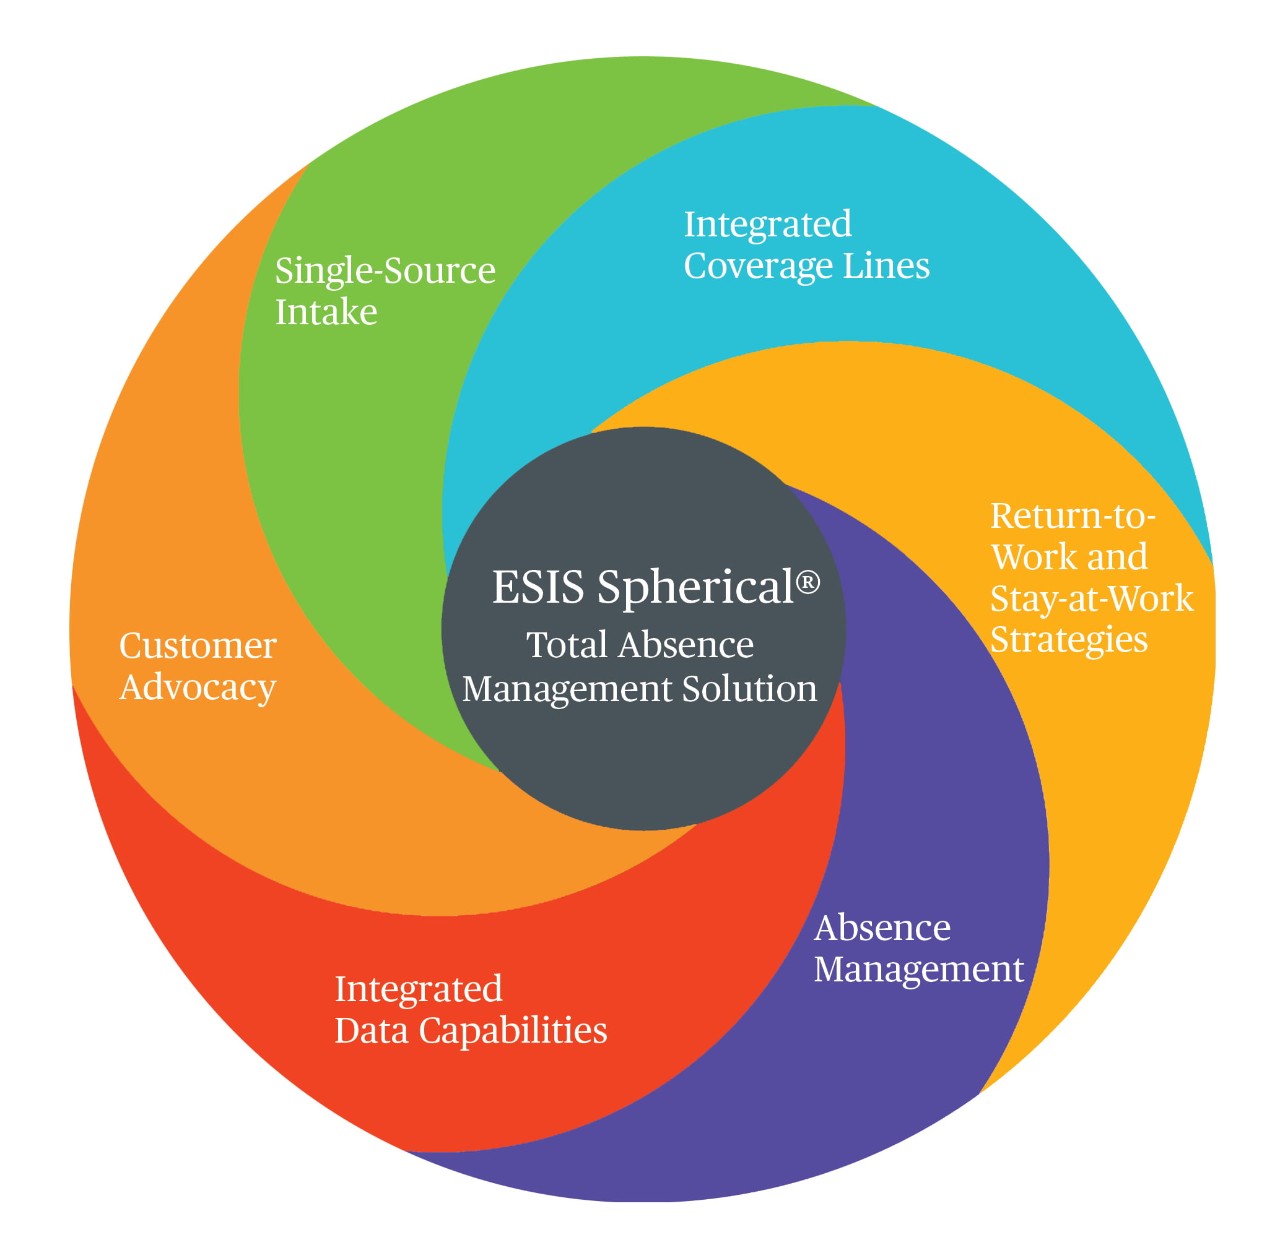 esis-spherical--total-absence-management-infographic-01.18-1.jpg